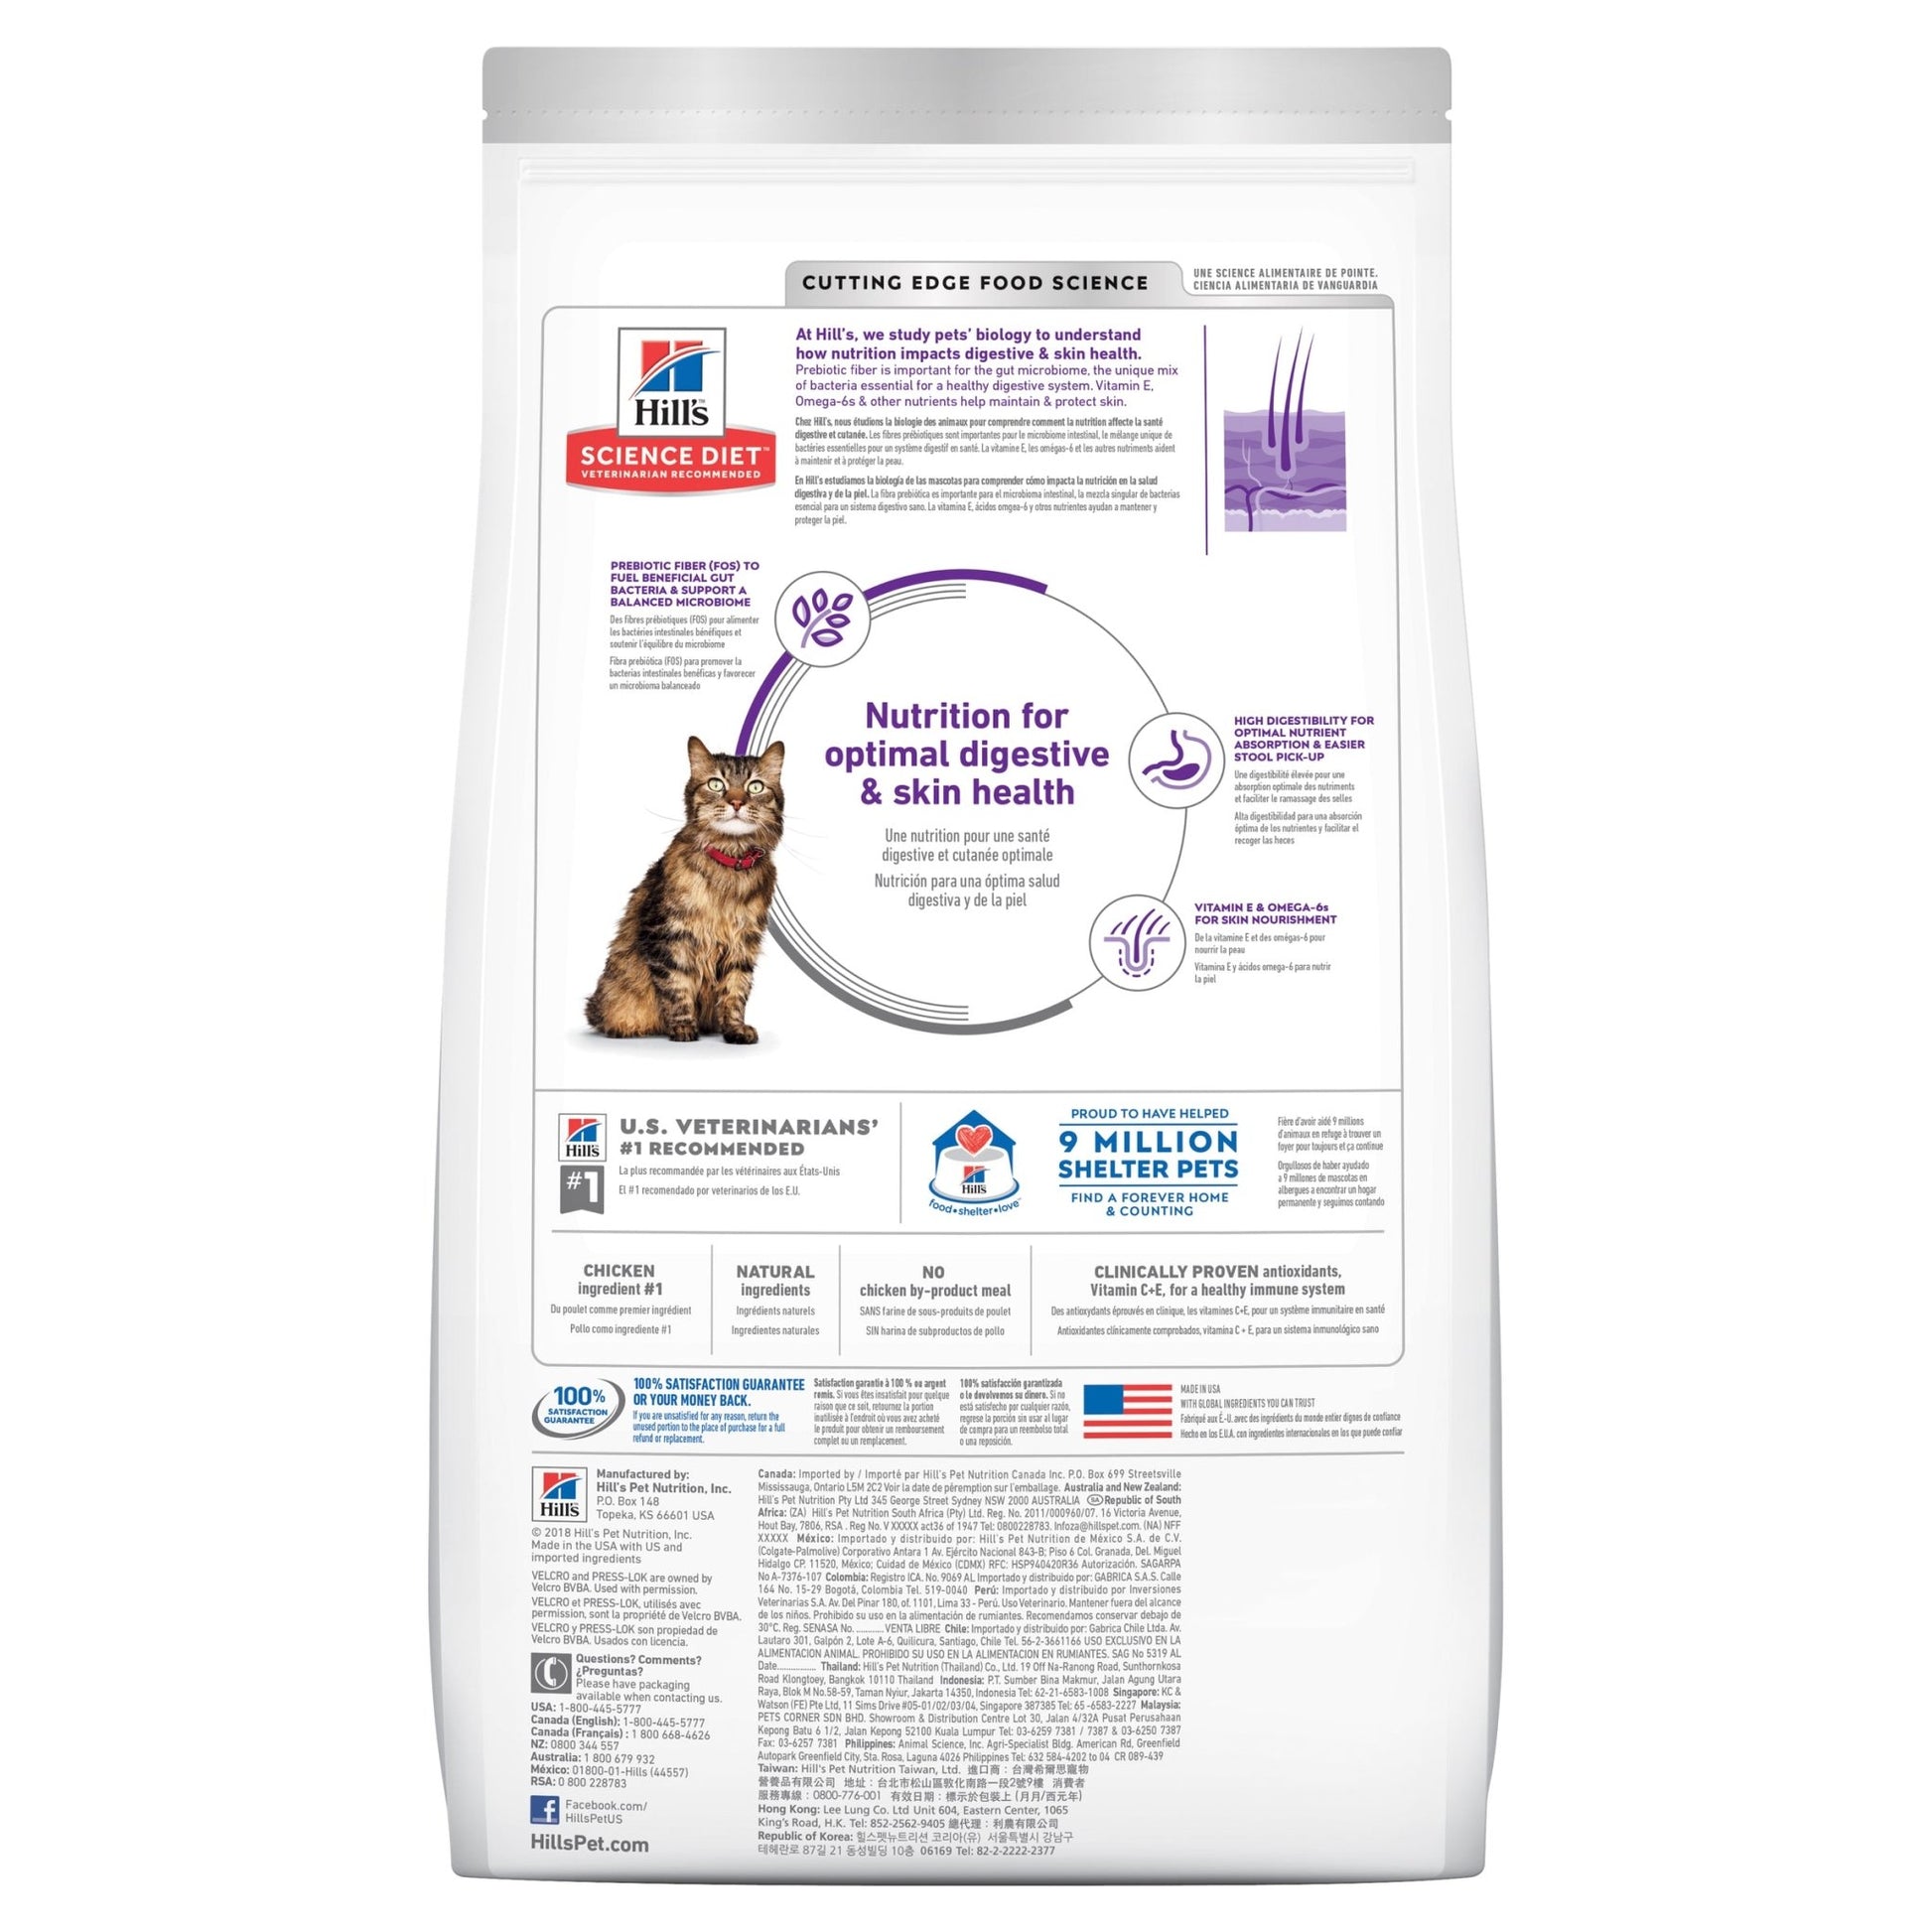 Hill's Science Diet Sensitive Stomach & Skin Adult Dry Cat Food - Woonona Petfood & Produce